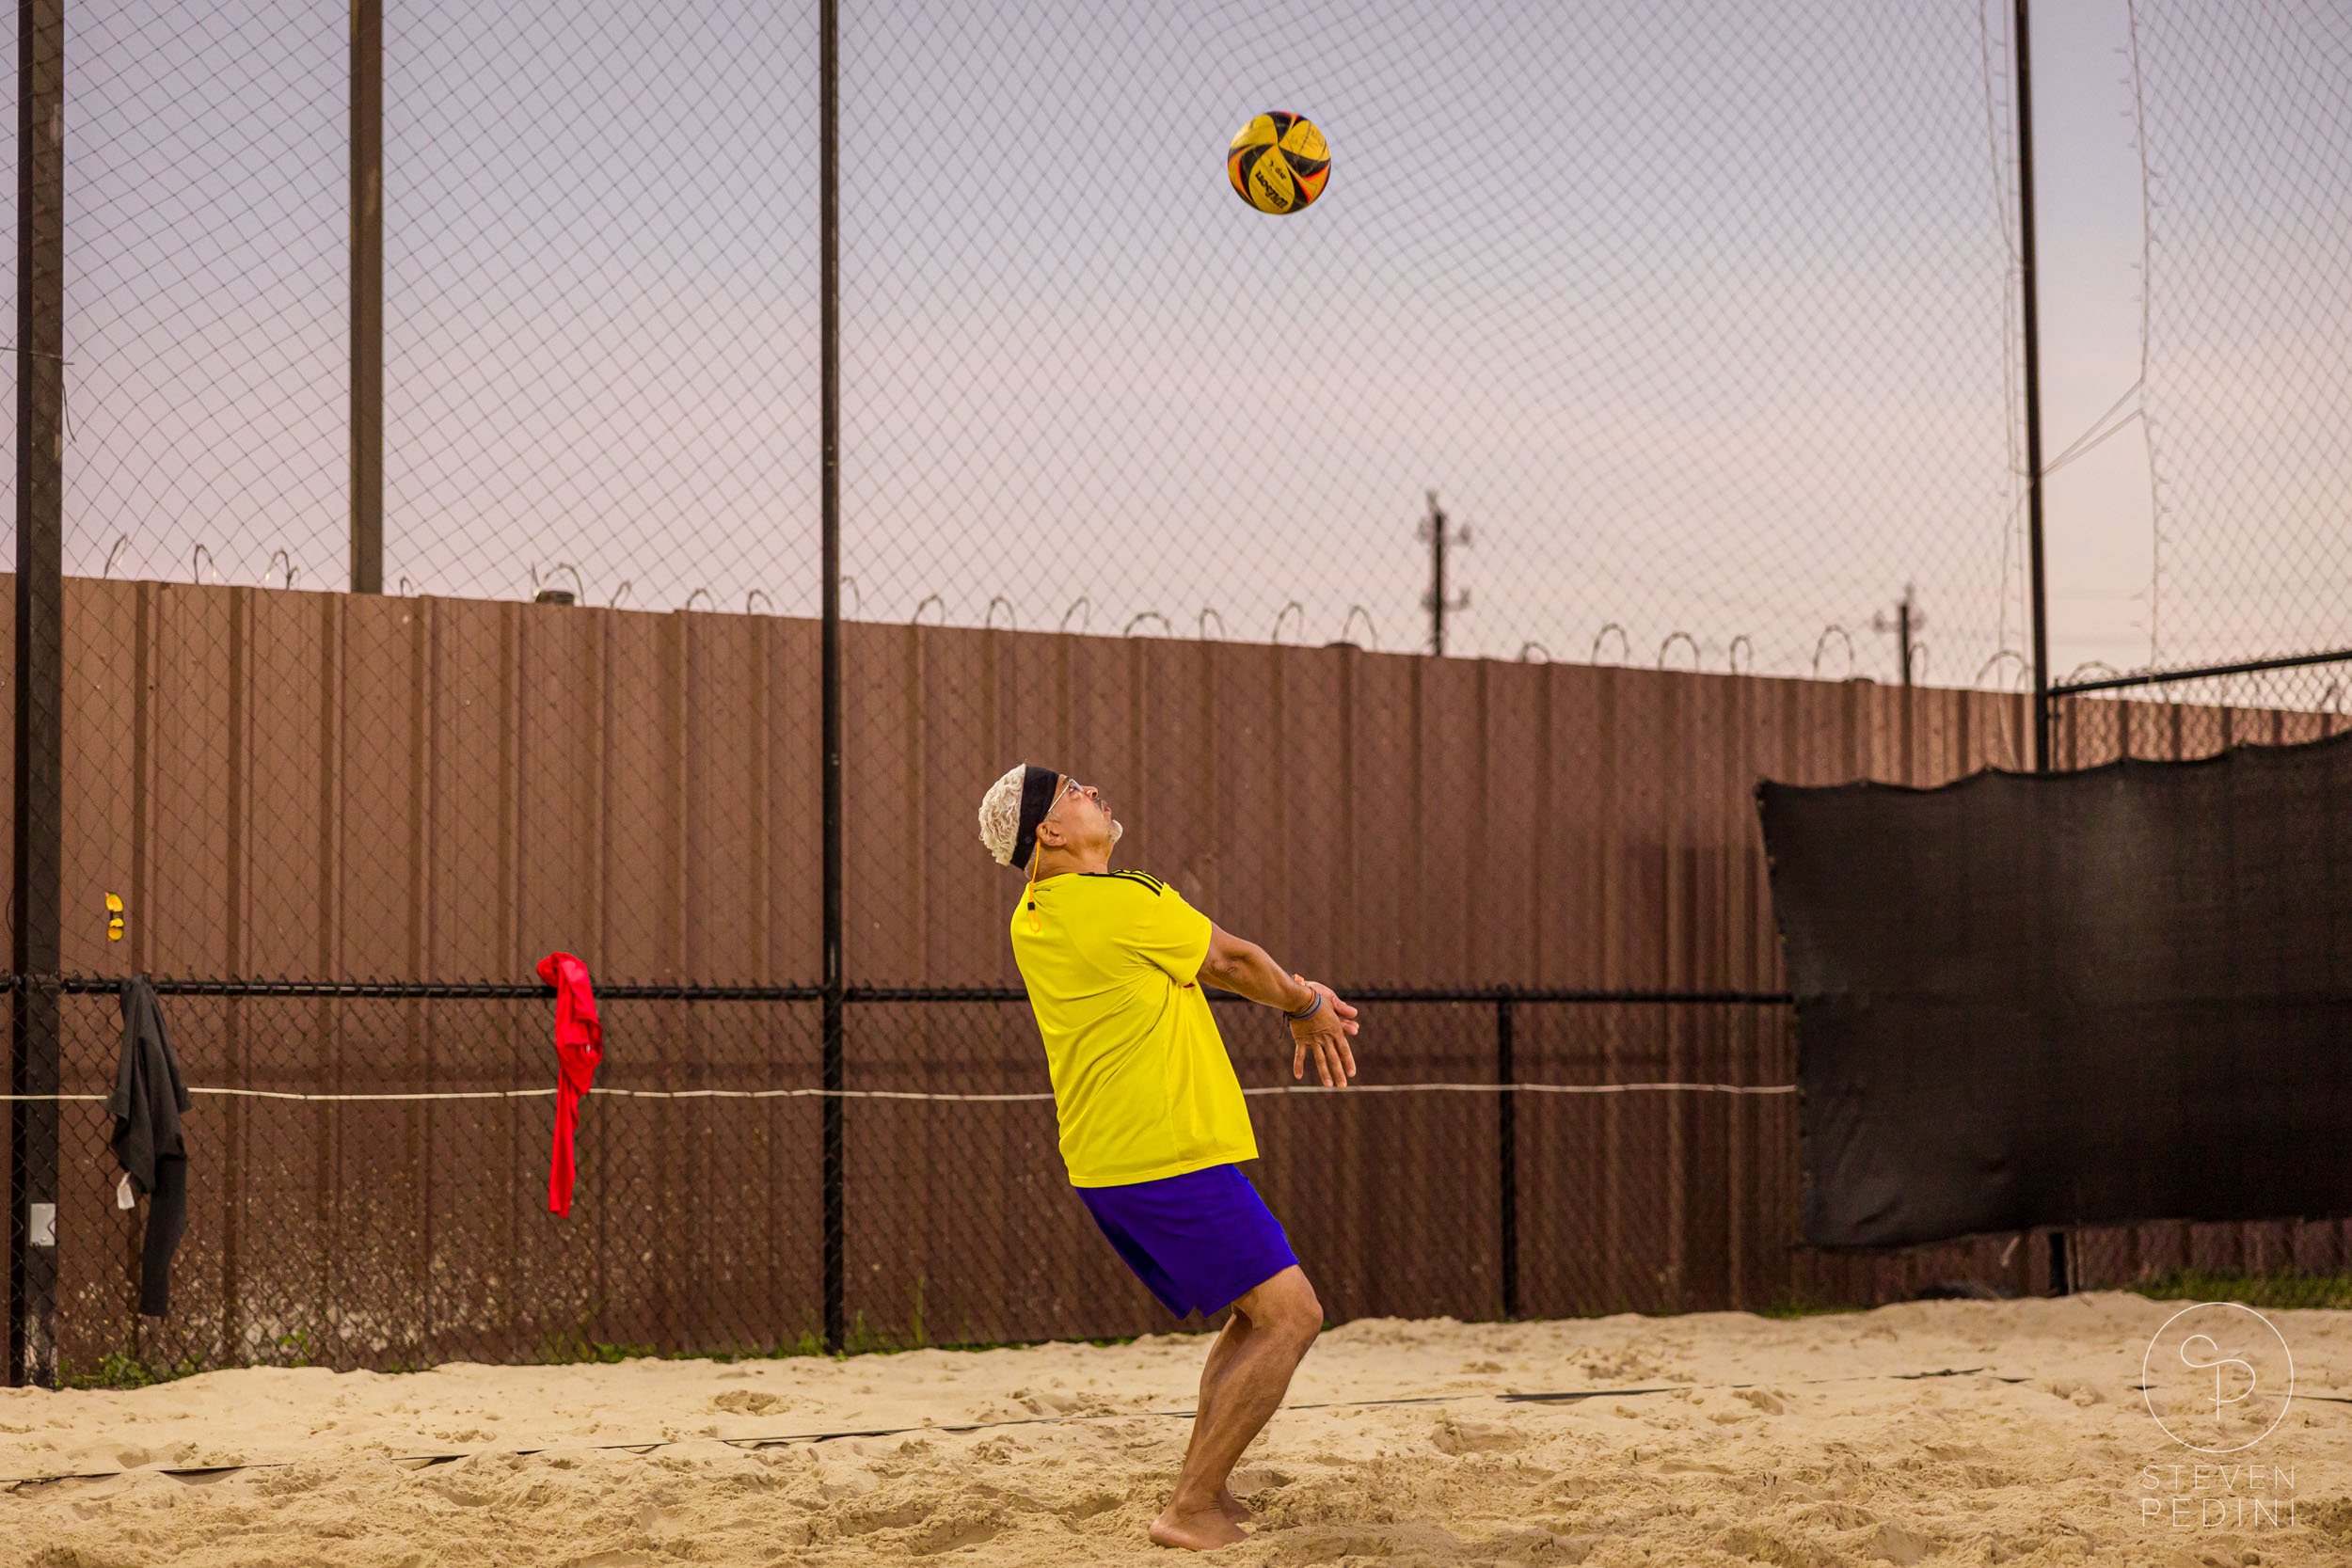 Steven Pedini Photography - Bumpy Pickle - Sand Volleyball - Houston TX - World Cup of Volleyball - 00287.jpg